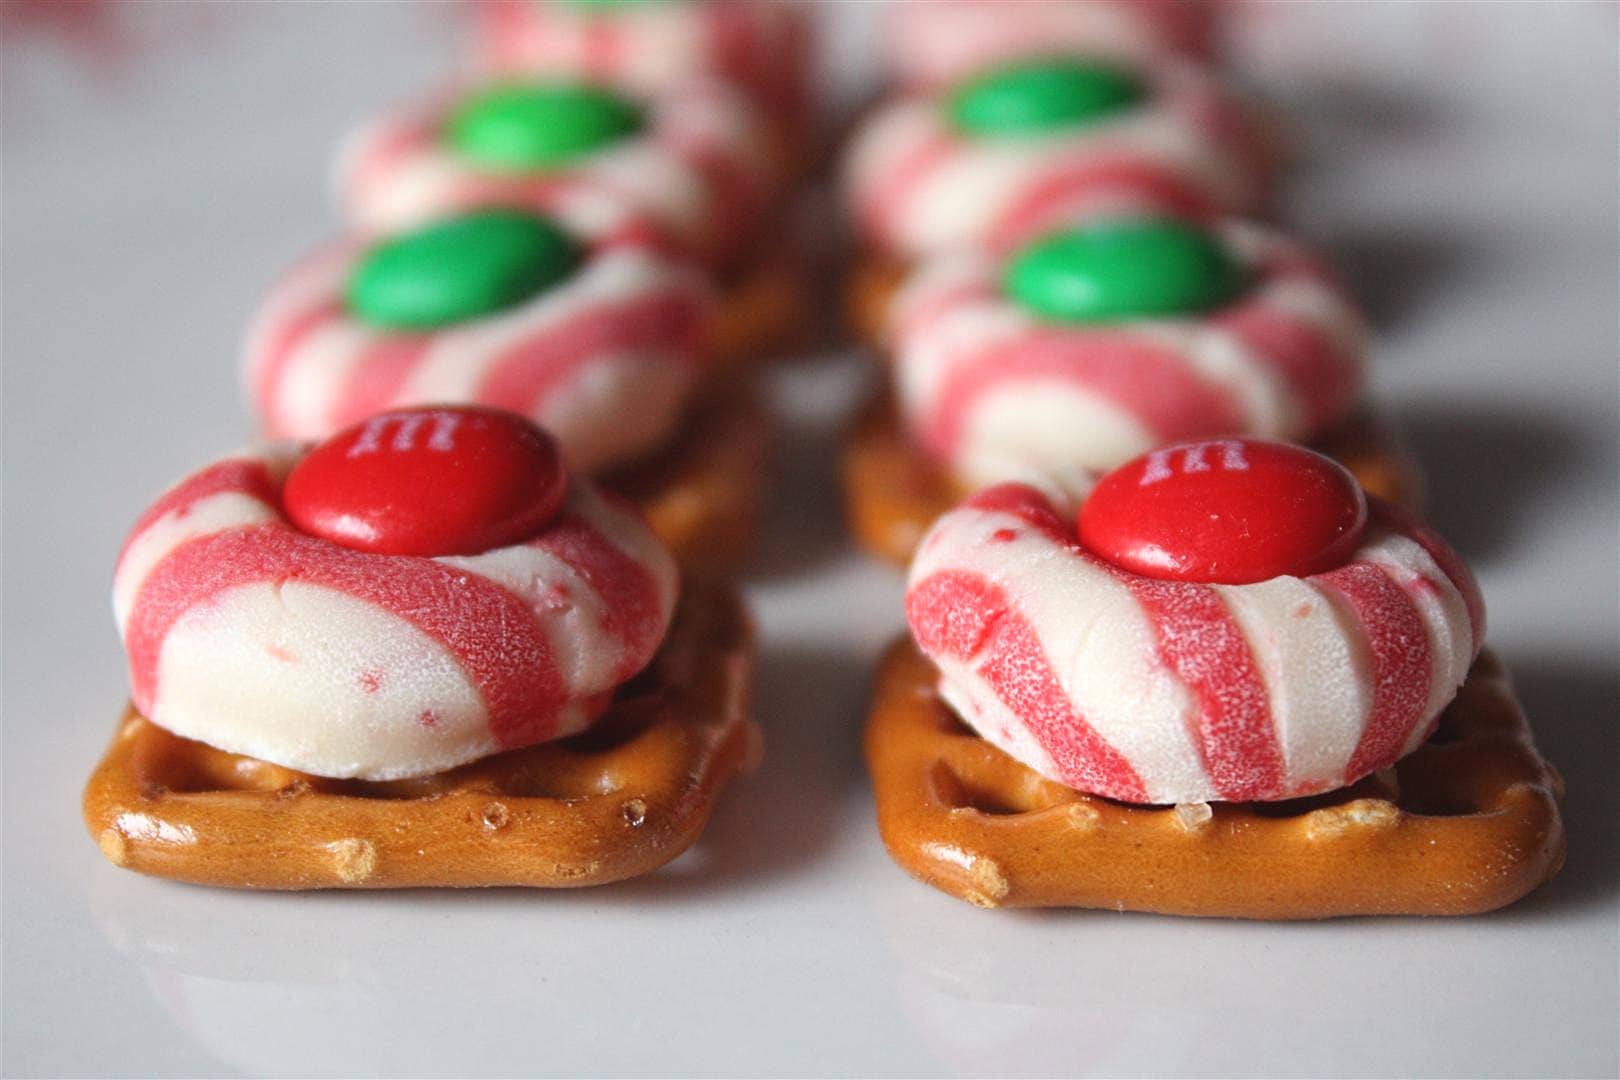 These candy cane pretzel buttons are the perfect easy holiday treat. They are a bit hit with kids and they are ready in just 25 minutes! Hello easy!